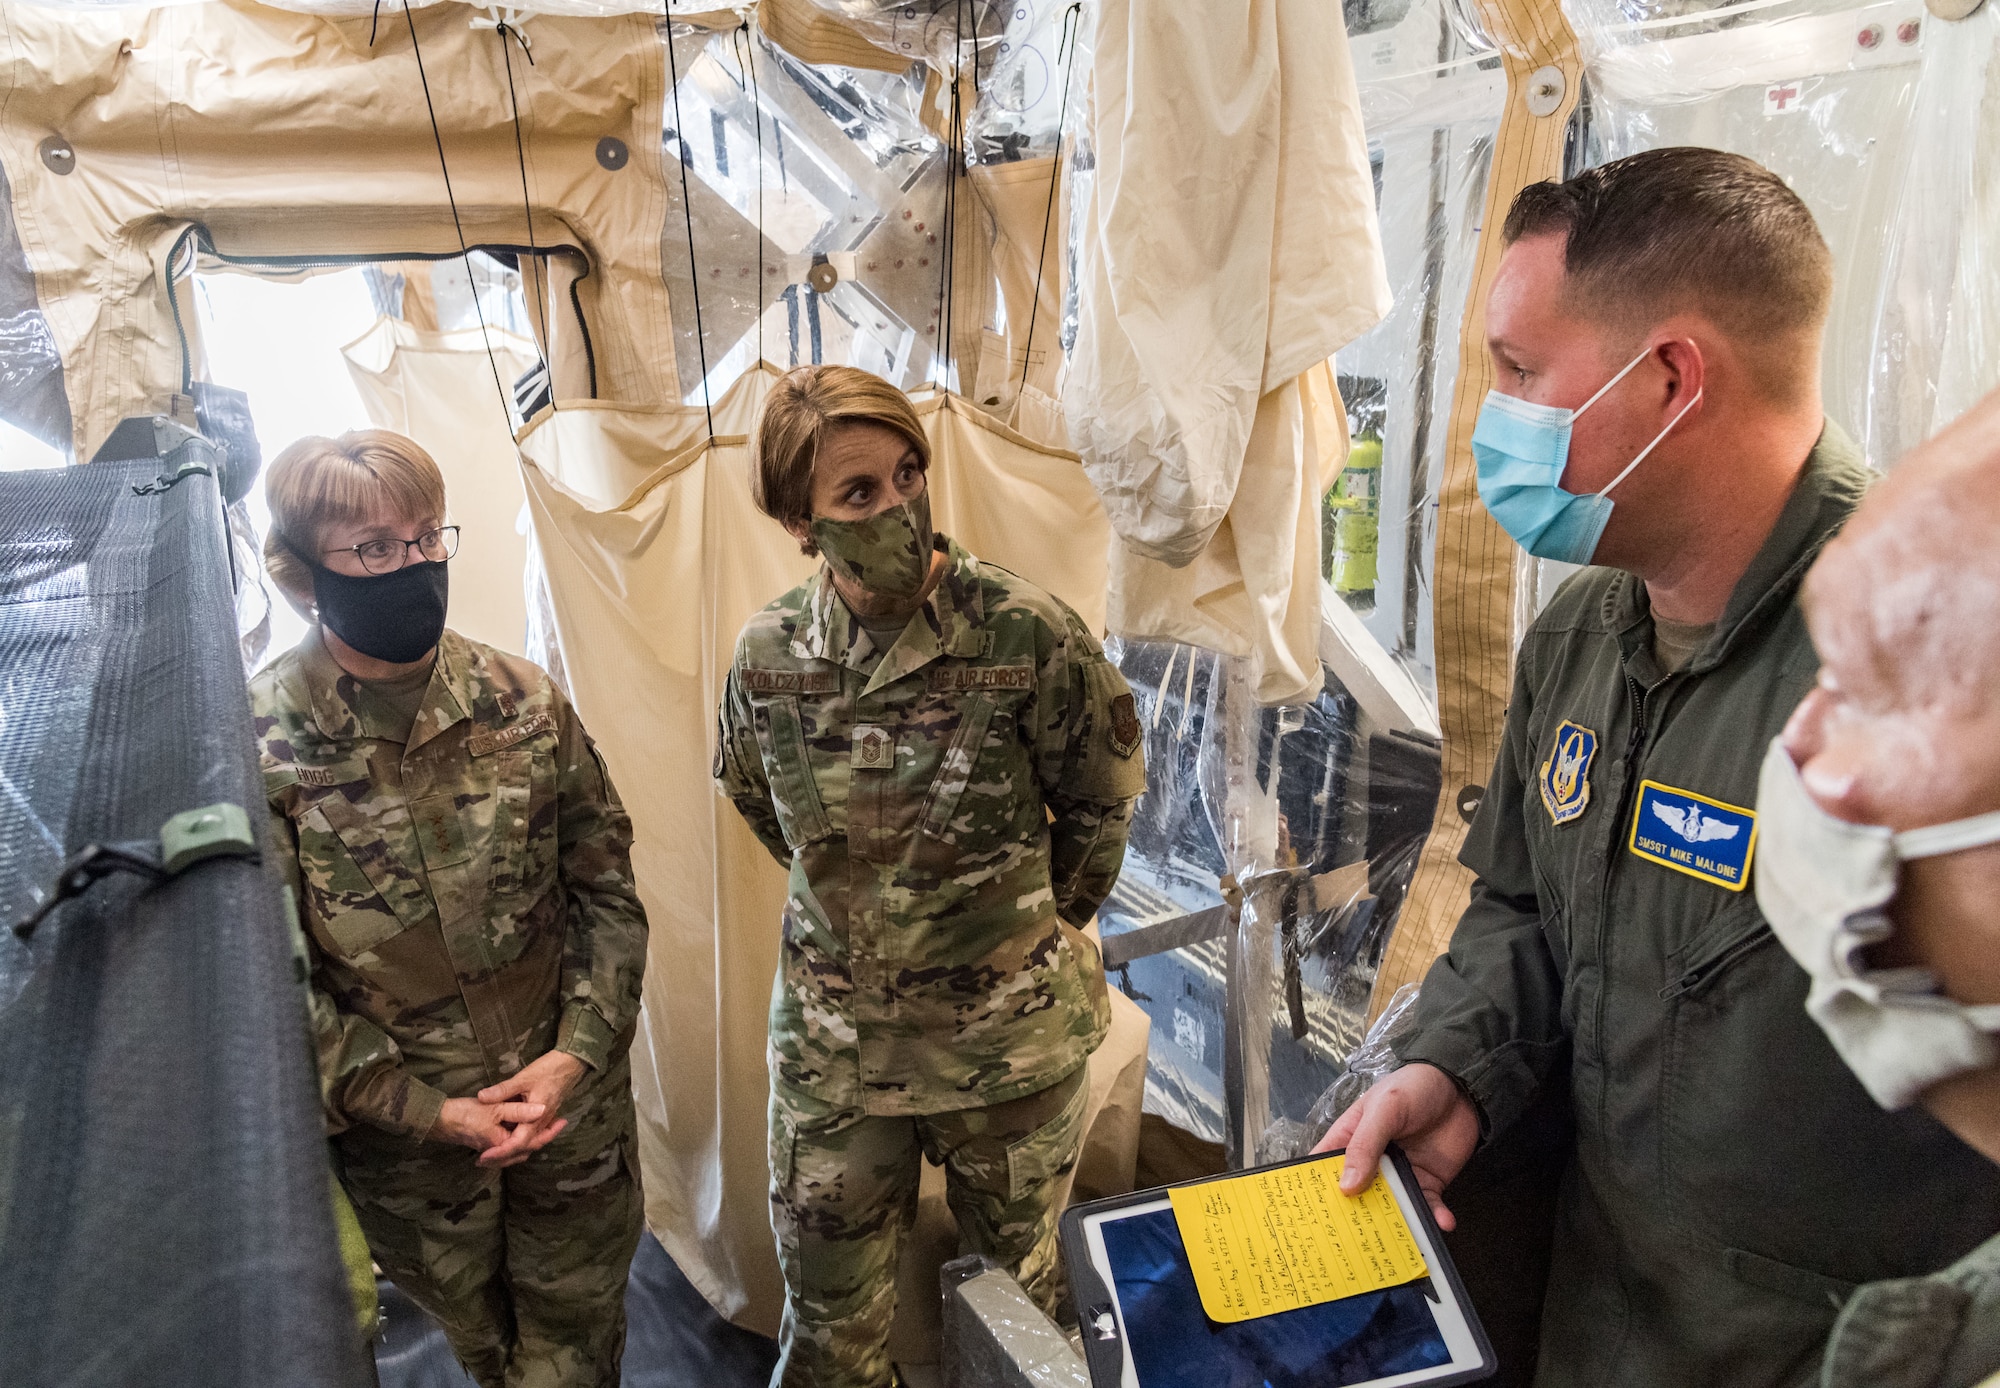 From the left, Lt. Gen. Dorothy Hogg, U.S. Air Force surgeon general, and Chief Master Sgt. Dawn Kolczynski, AF/SG chief of medical operations, talk with Senior Master Sgt. Michael Malone, 36th Aeromedical Evacuation Squadron training noncommissioned officer in charge and AE technician, and Maj. Mark Dellinger, 36th AES training flight commander, both from Keesler Air Force Base, Mississippi, inside a Transport Isolation System, June 26, 2020, at Dover Air Force Base, Delaware. Dover serves as the U.S. East Coast hub for the TIS. (U.S. Air Force photo by Roland Balik)